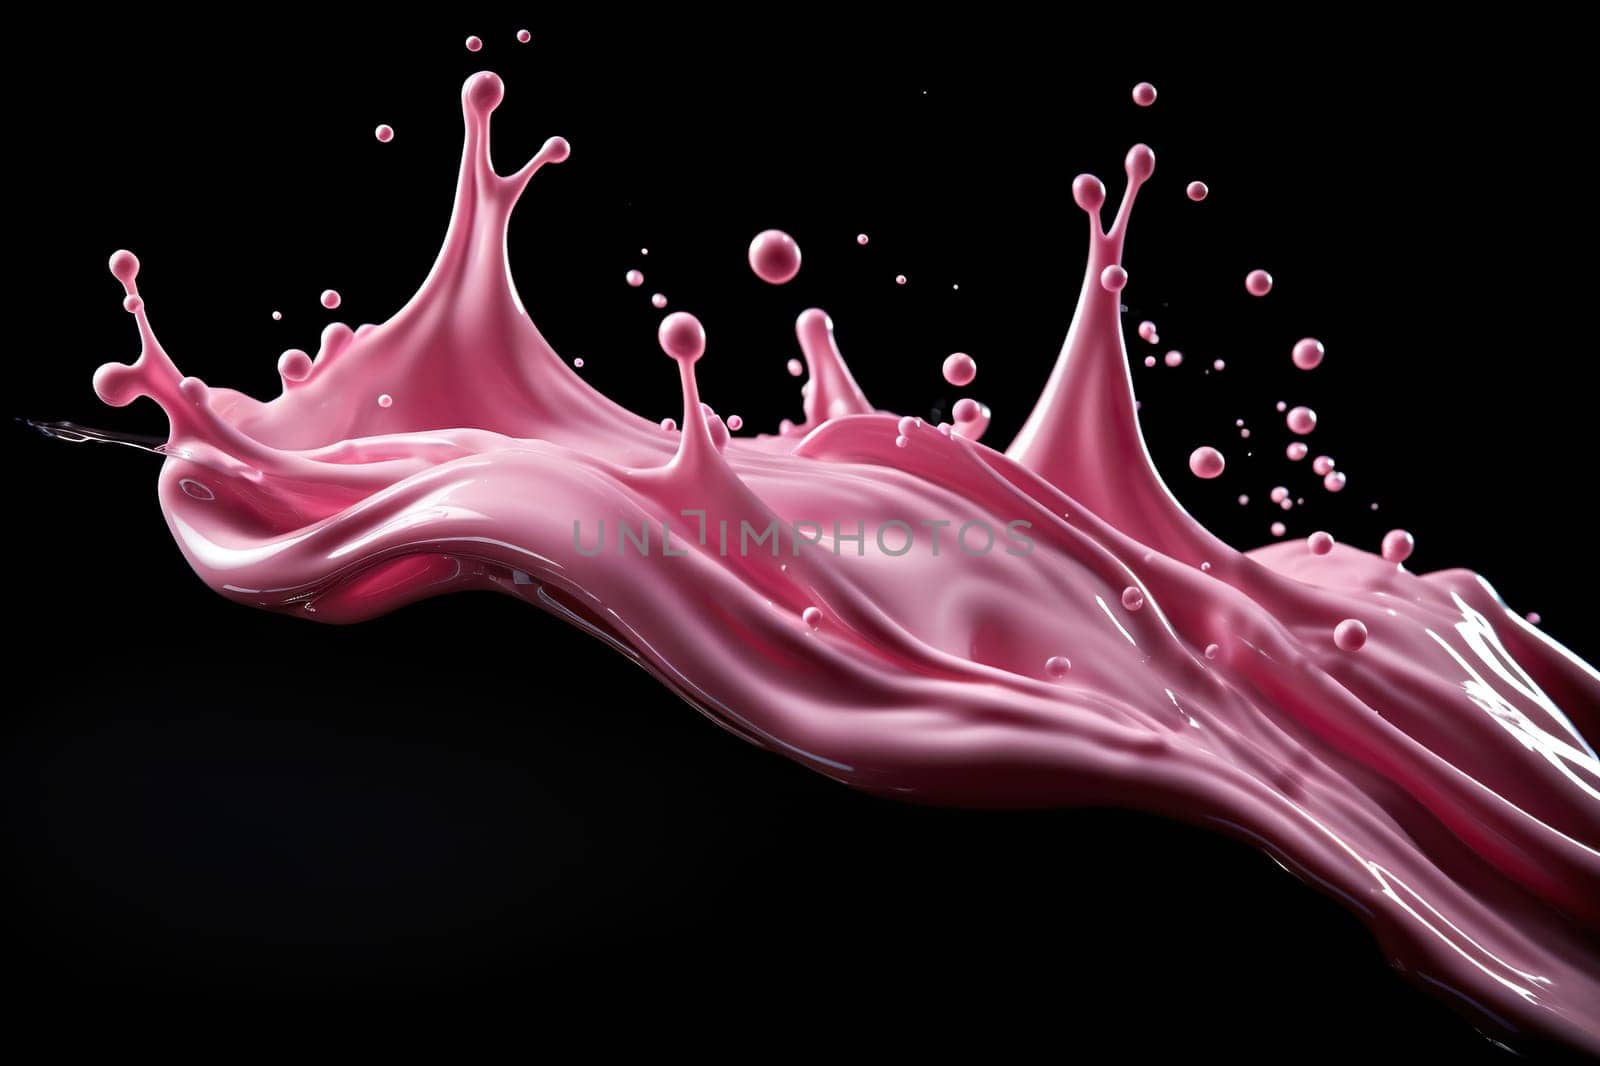 Splash of pink icing, milk on a black background. Studio photo of the product.